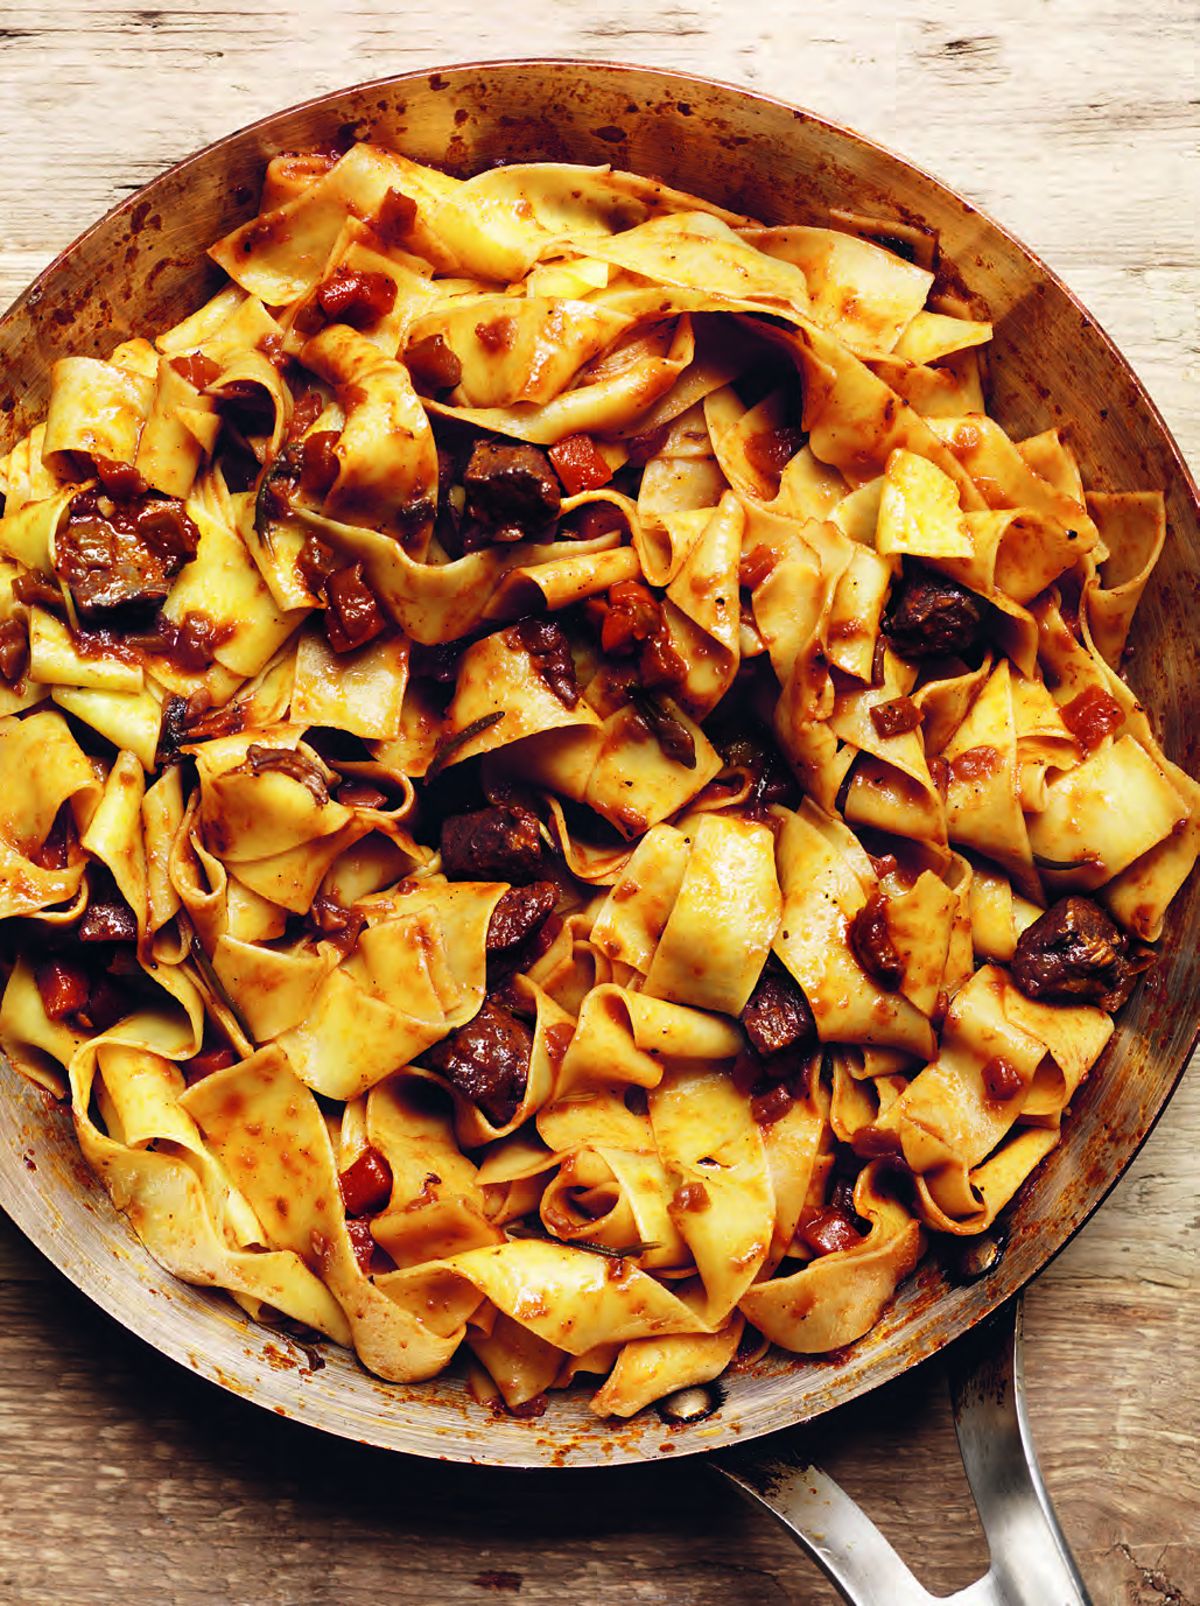 Pasta with Duck Sauce [ pappardelle al ragù d’anatra ]